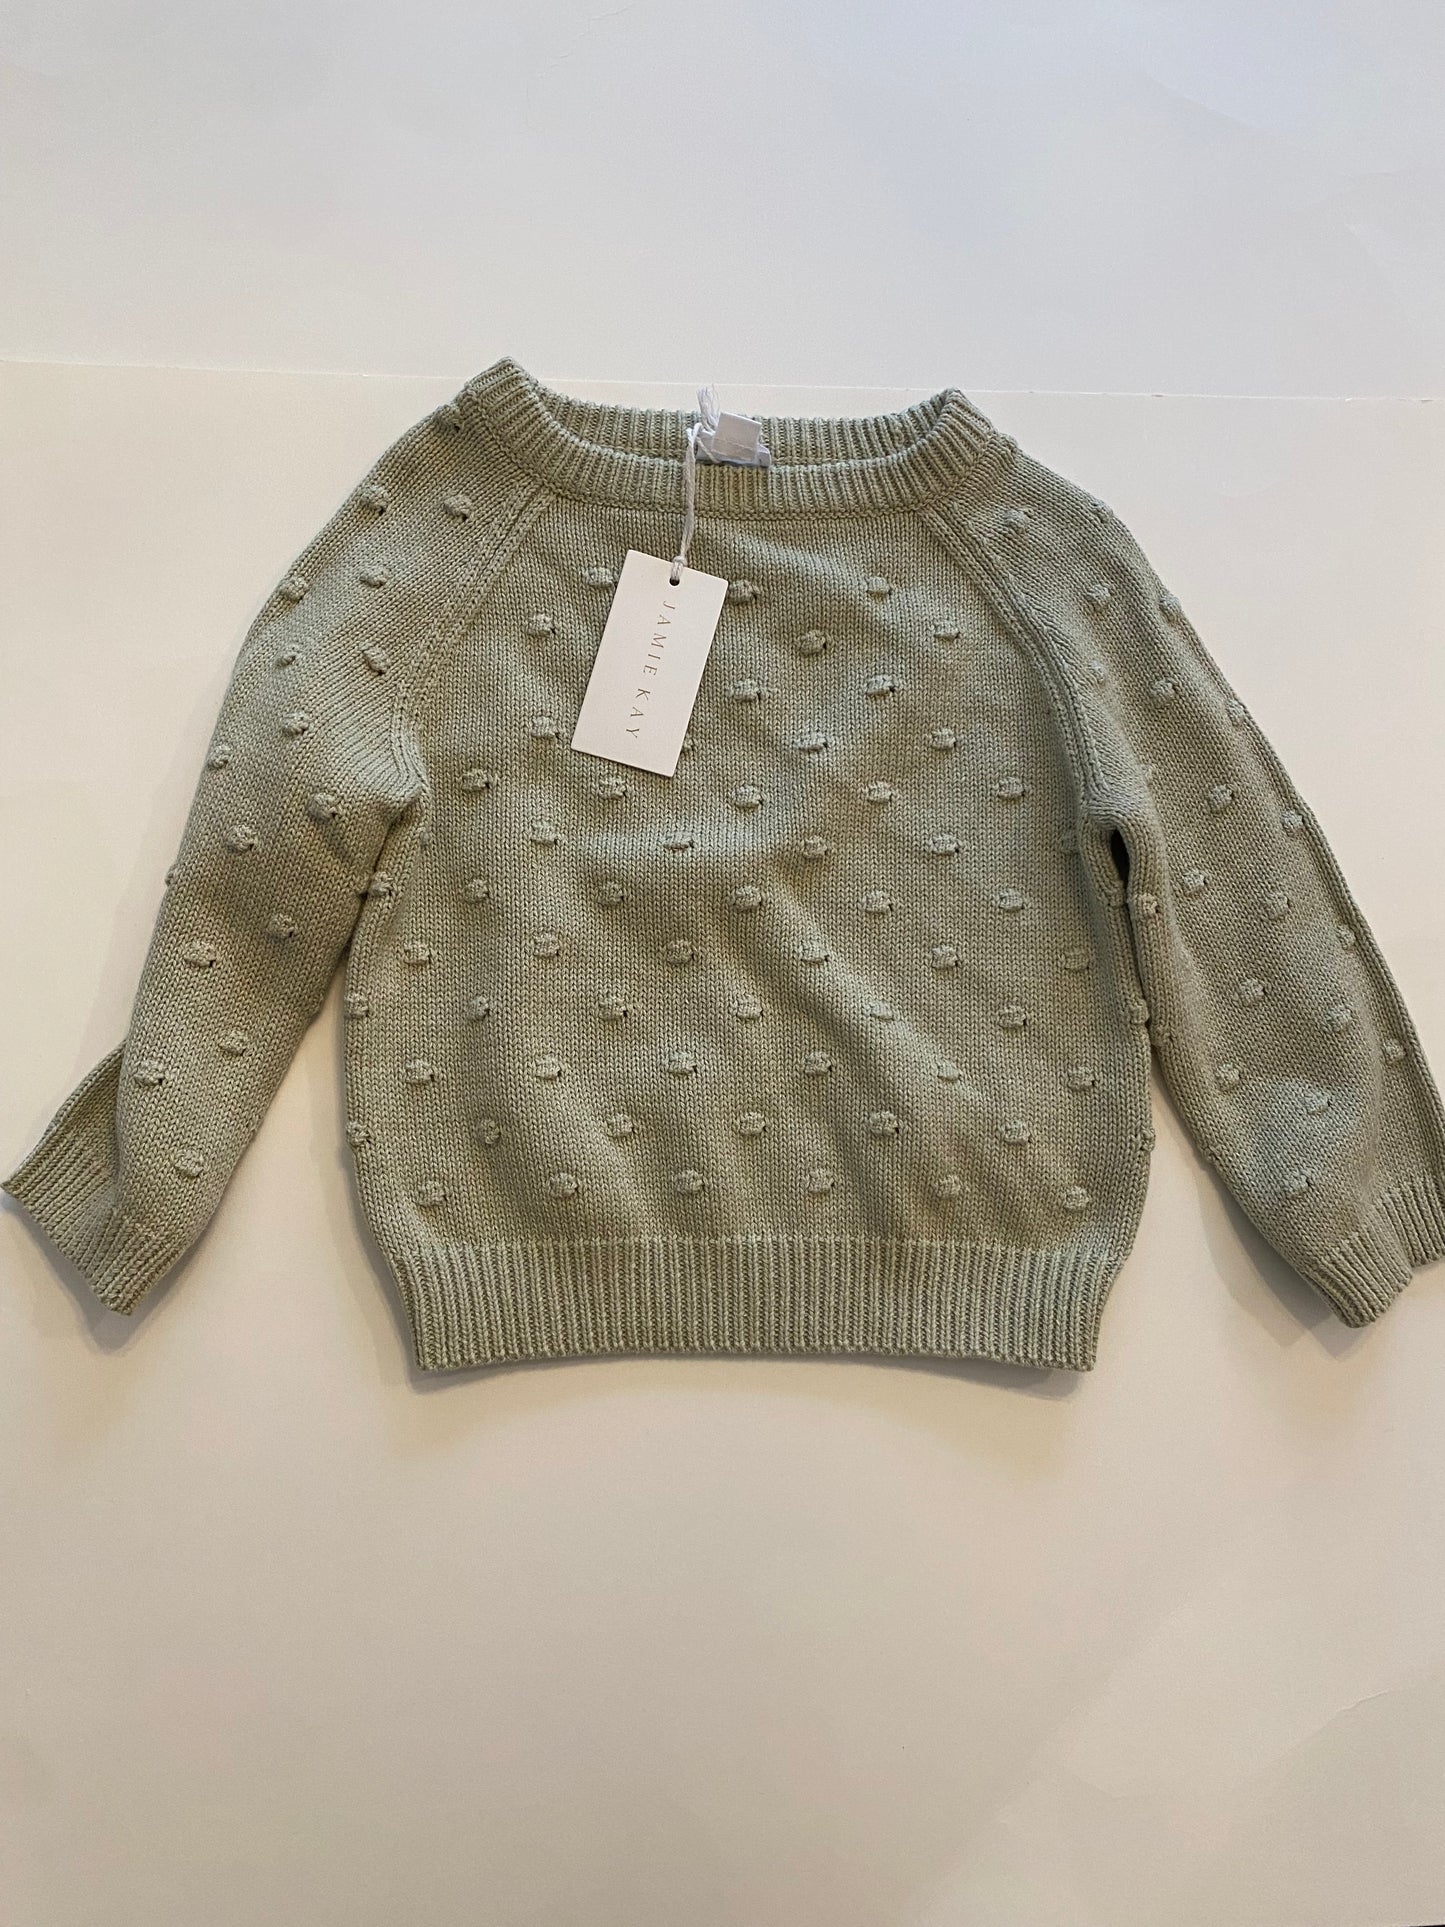 Girls 3T sweater   Jamie Kay   New with tags